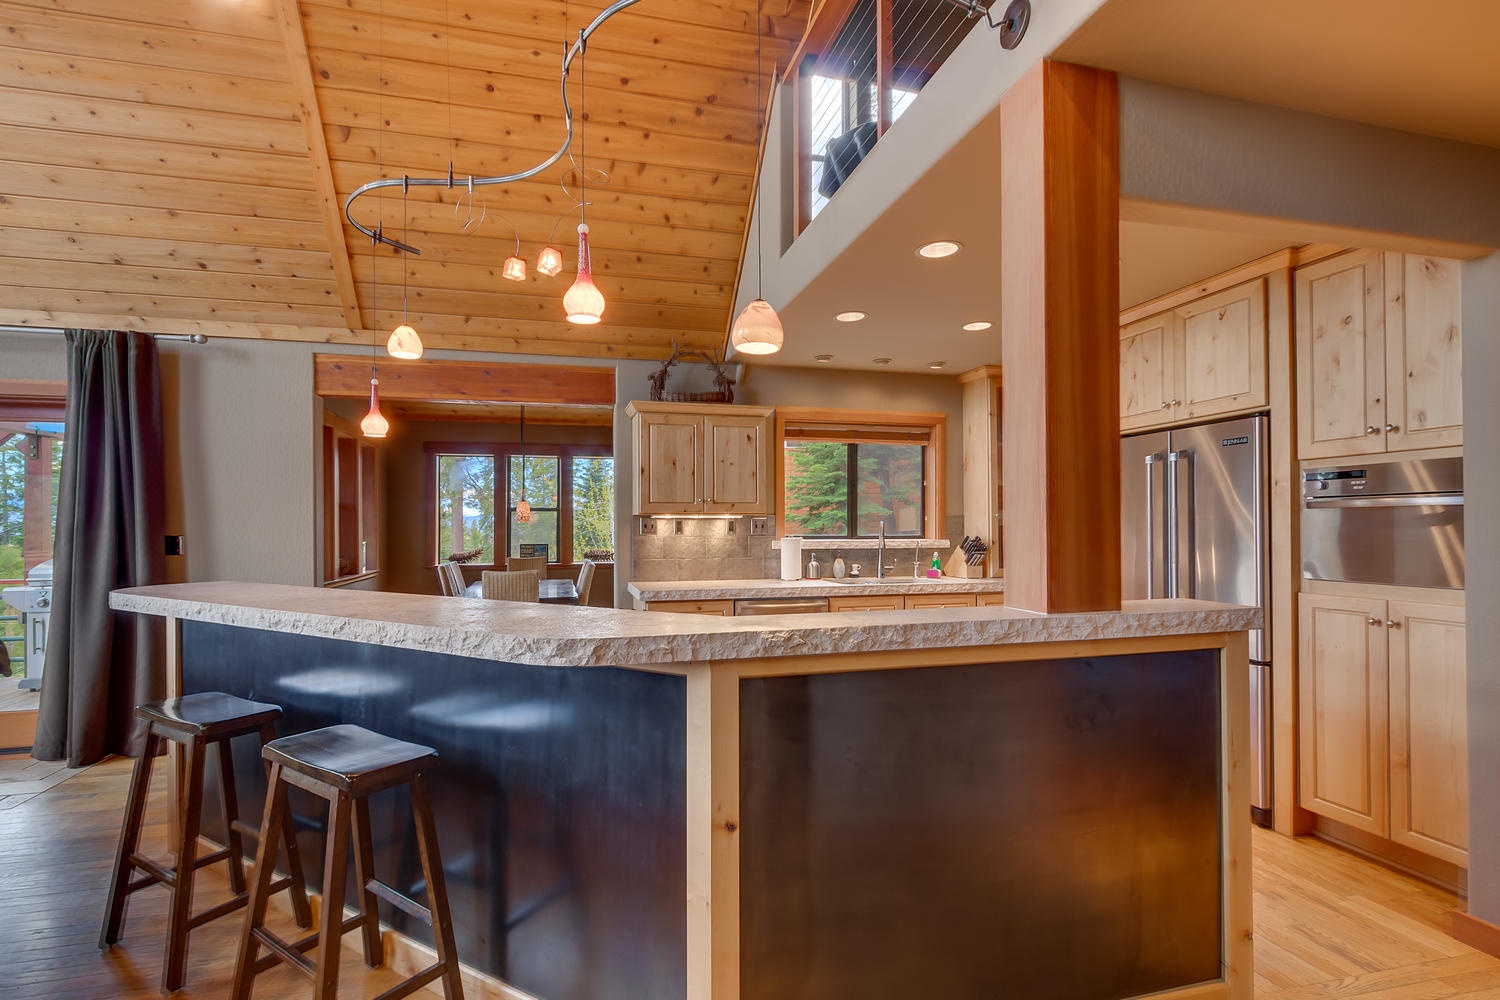 Kitchen with refrigerator and bar style seating: Falcon's Eye View Retreat